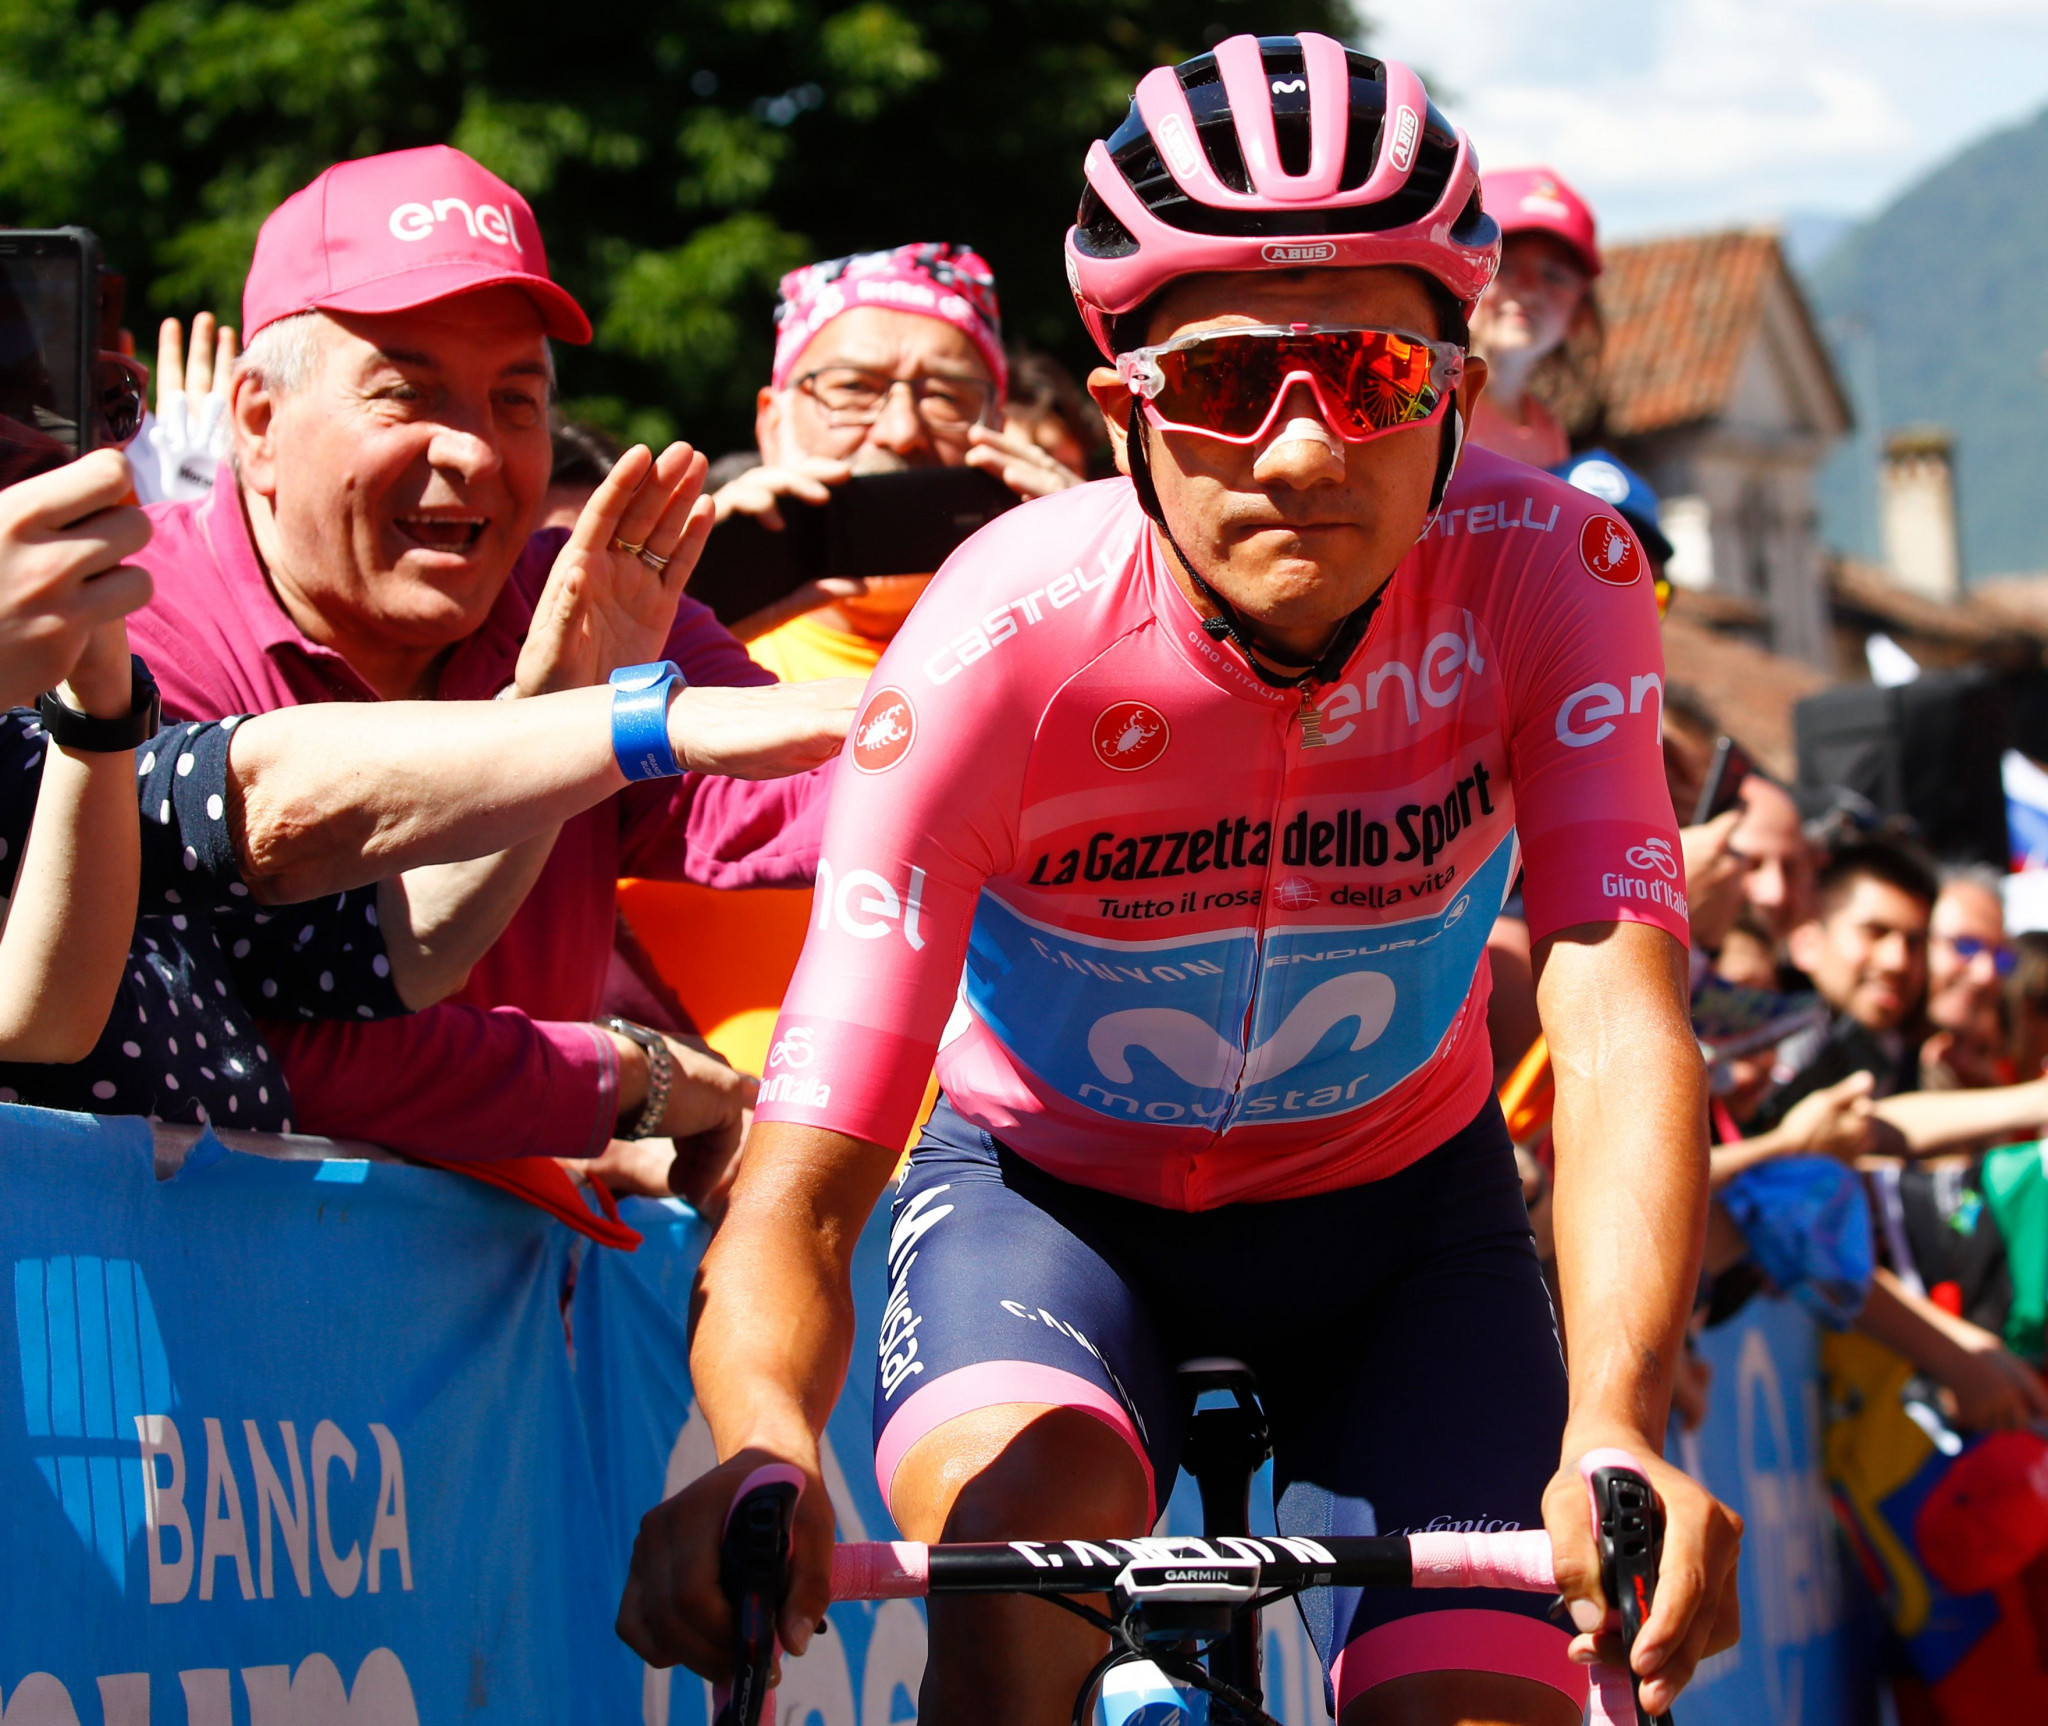 Richard Carapaz kept hold of the leader's pink jersey heading into the deciding time trial ©Getty Images